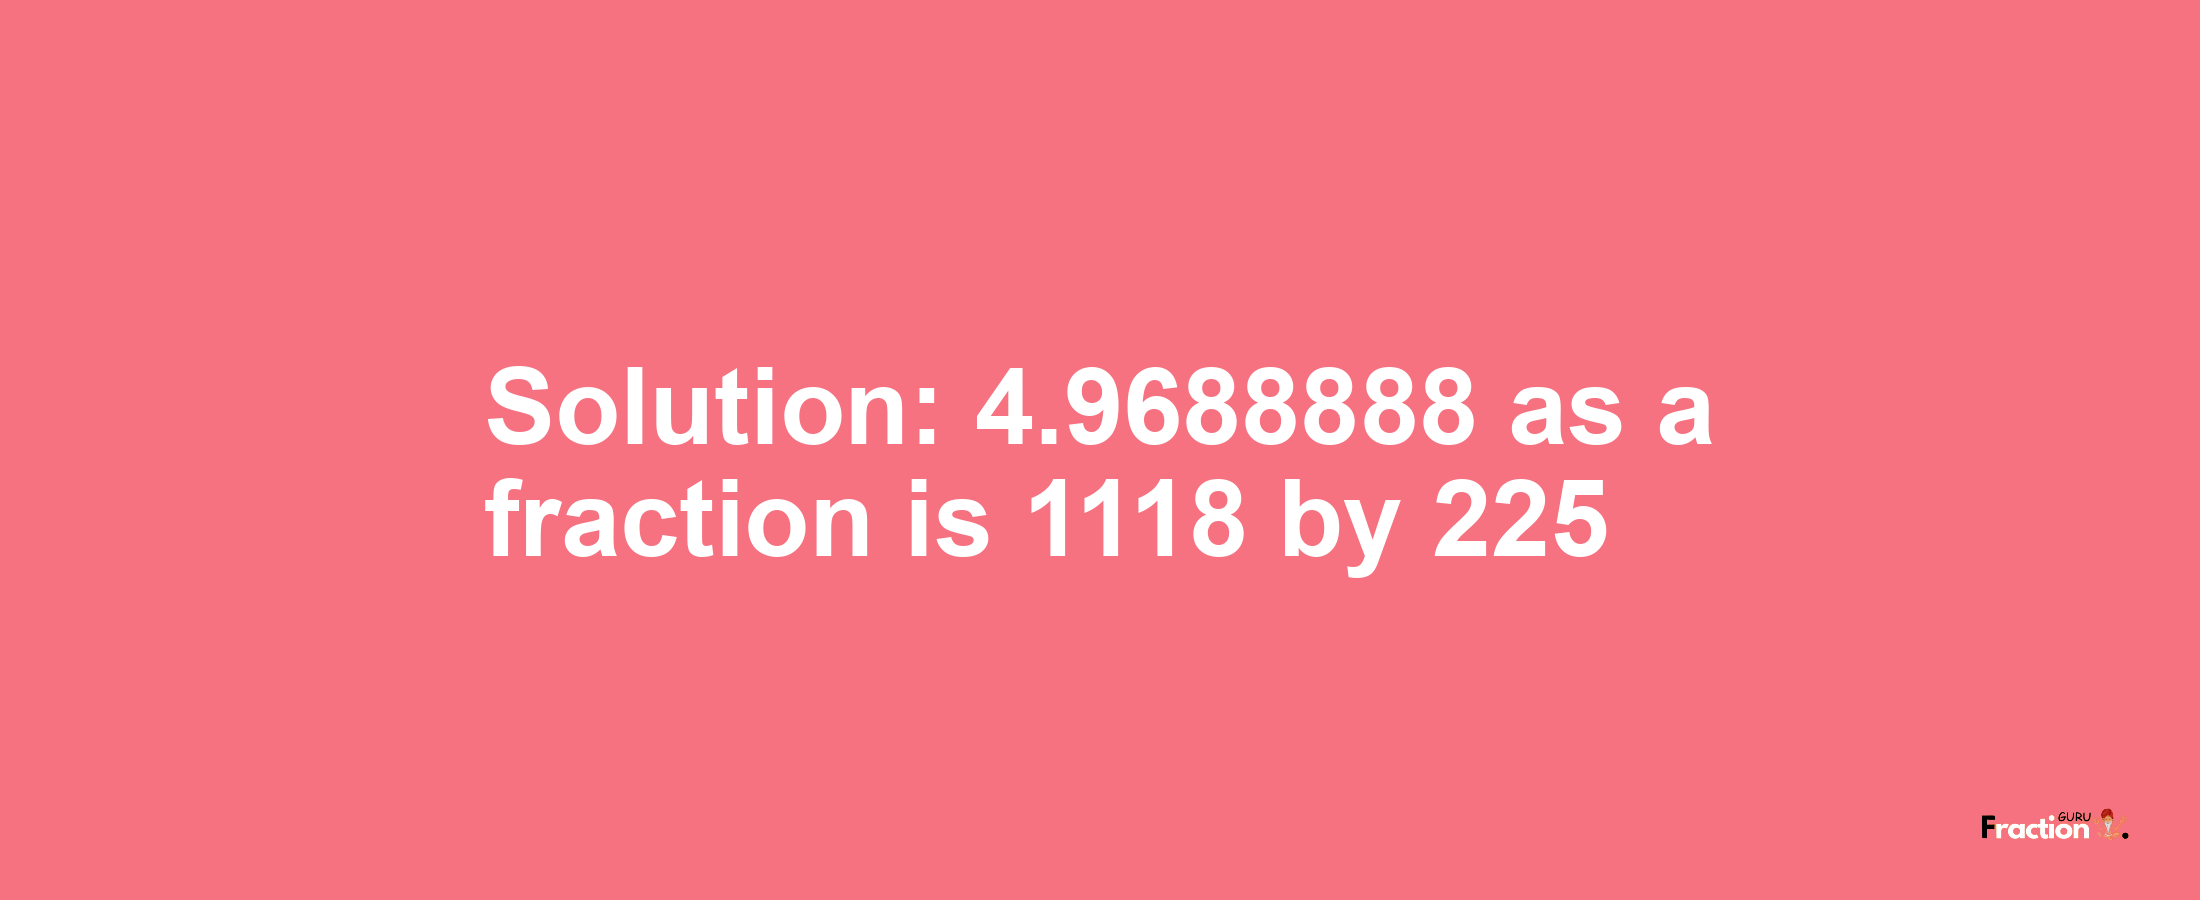 Solution:4.9688888 as a fraction is 1118/225